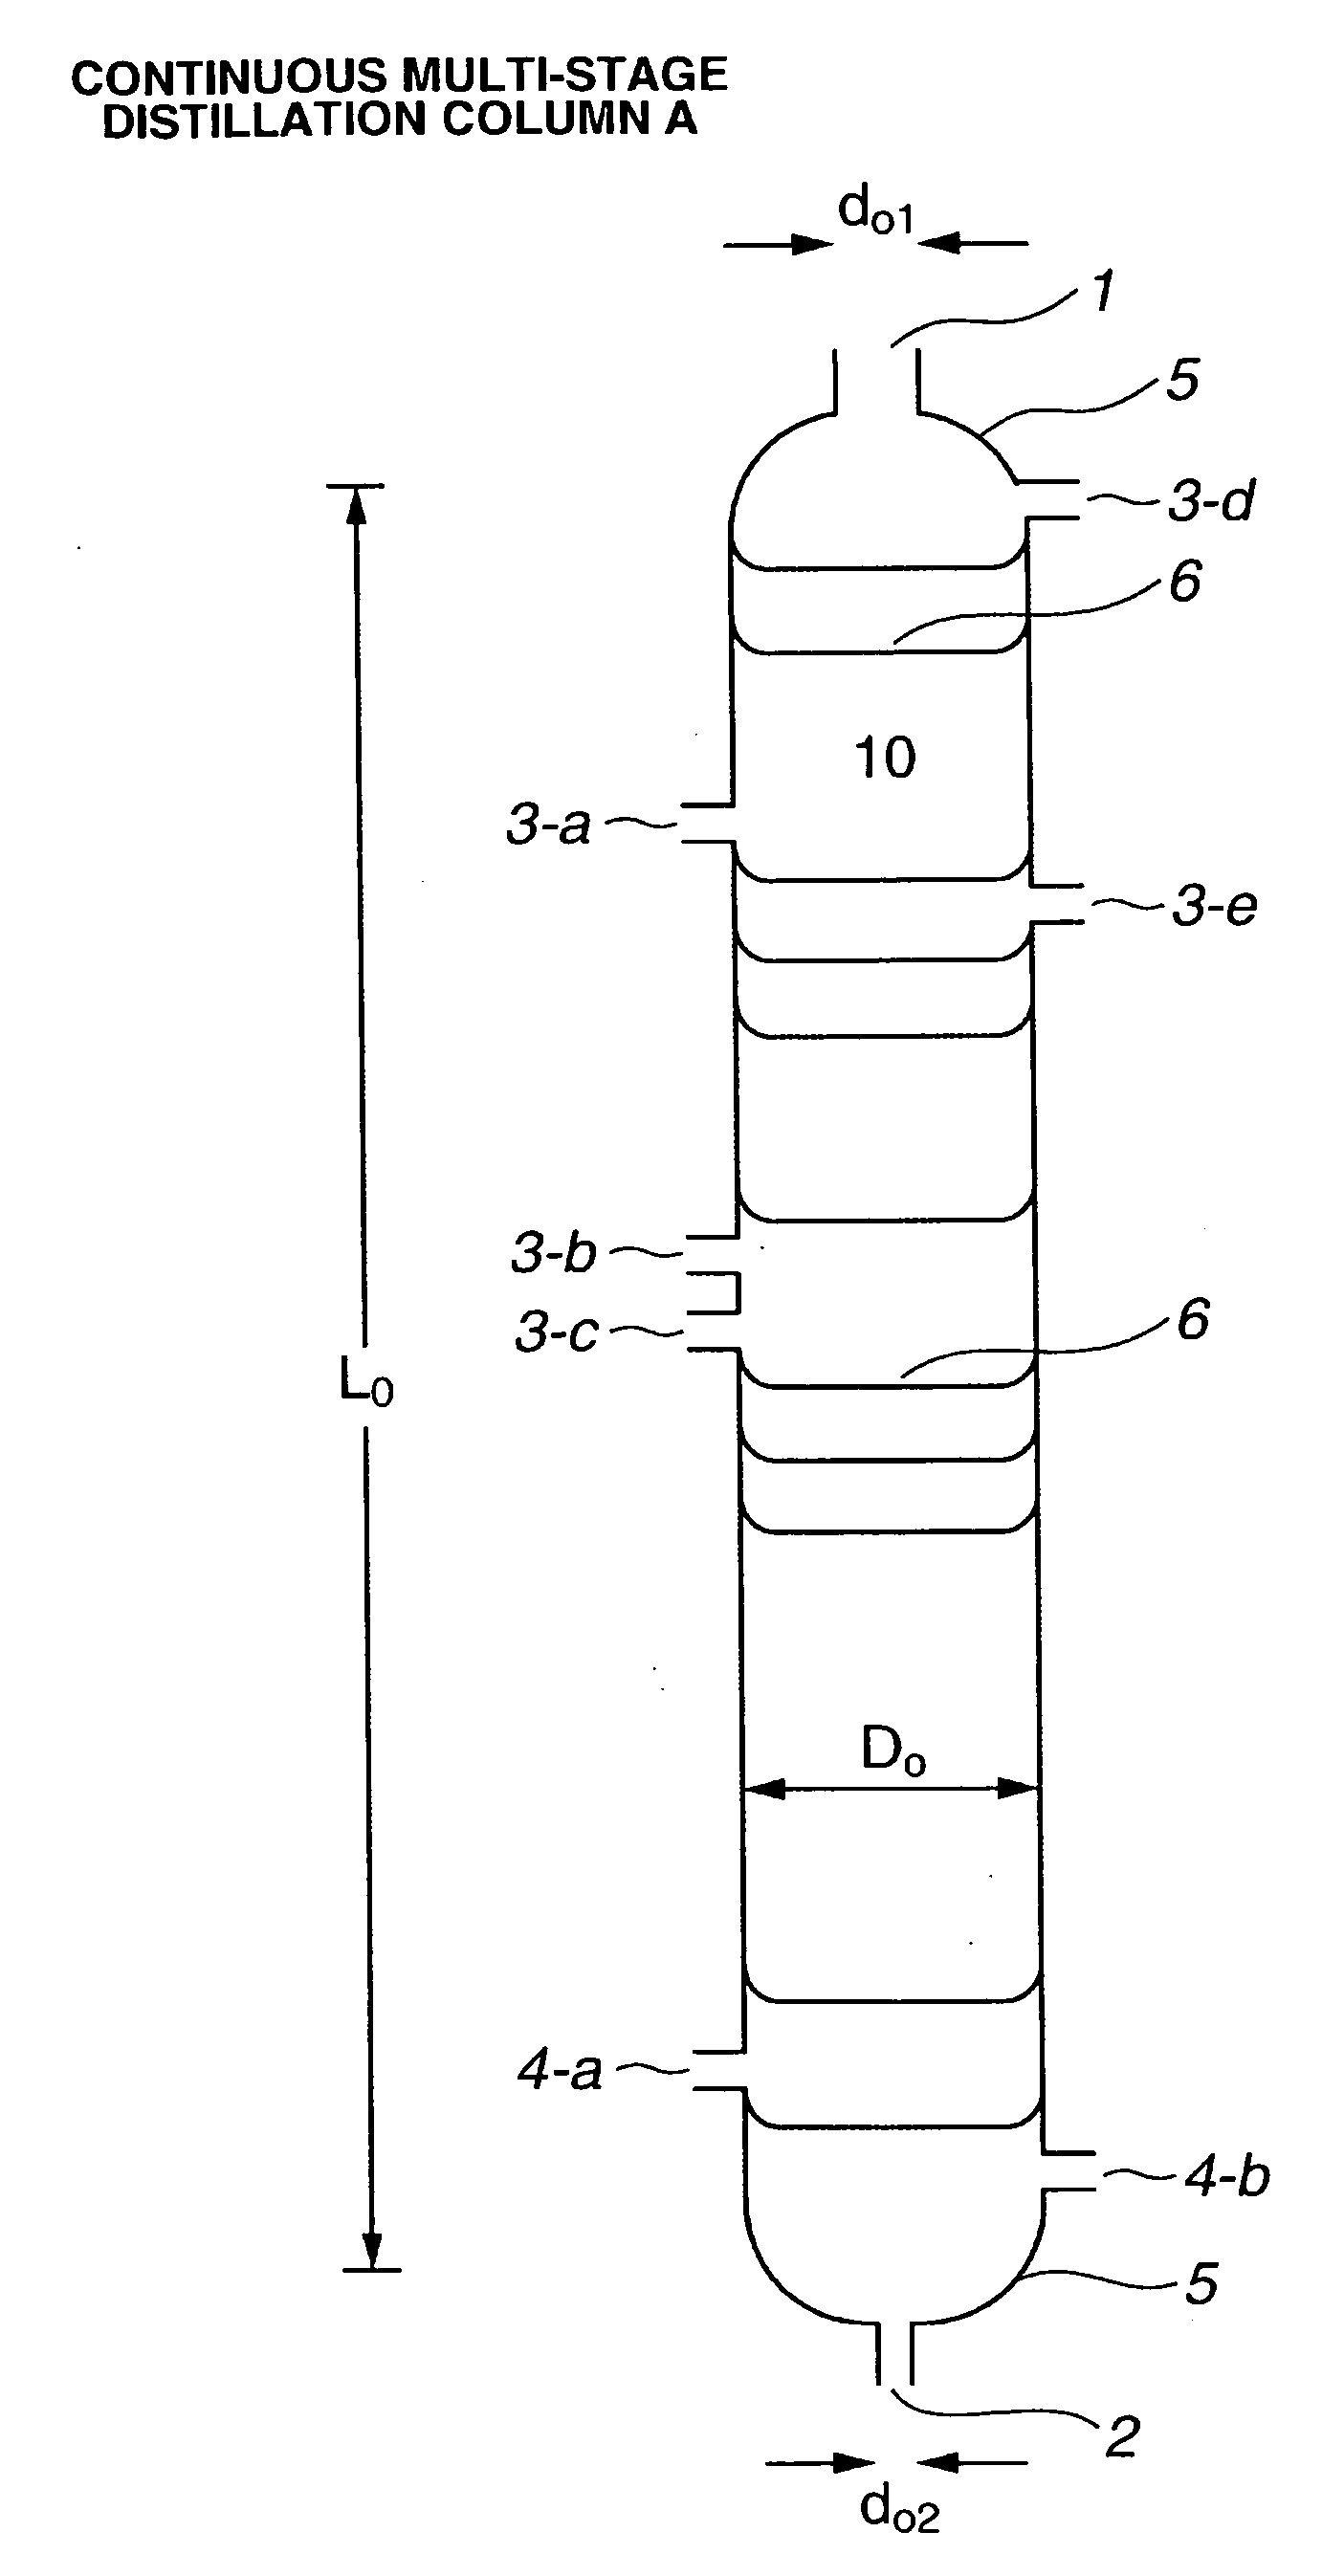 Industrial Process for Producing High-Purity Diol